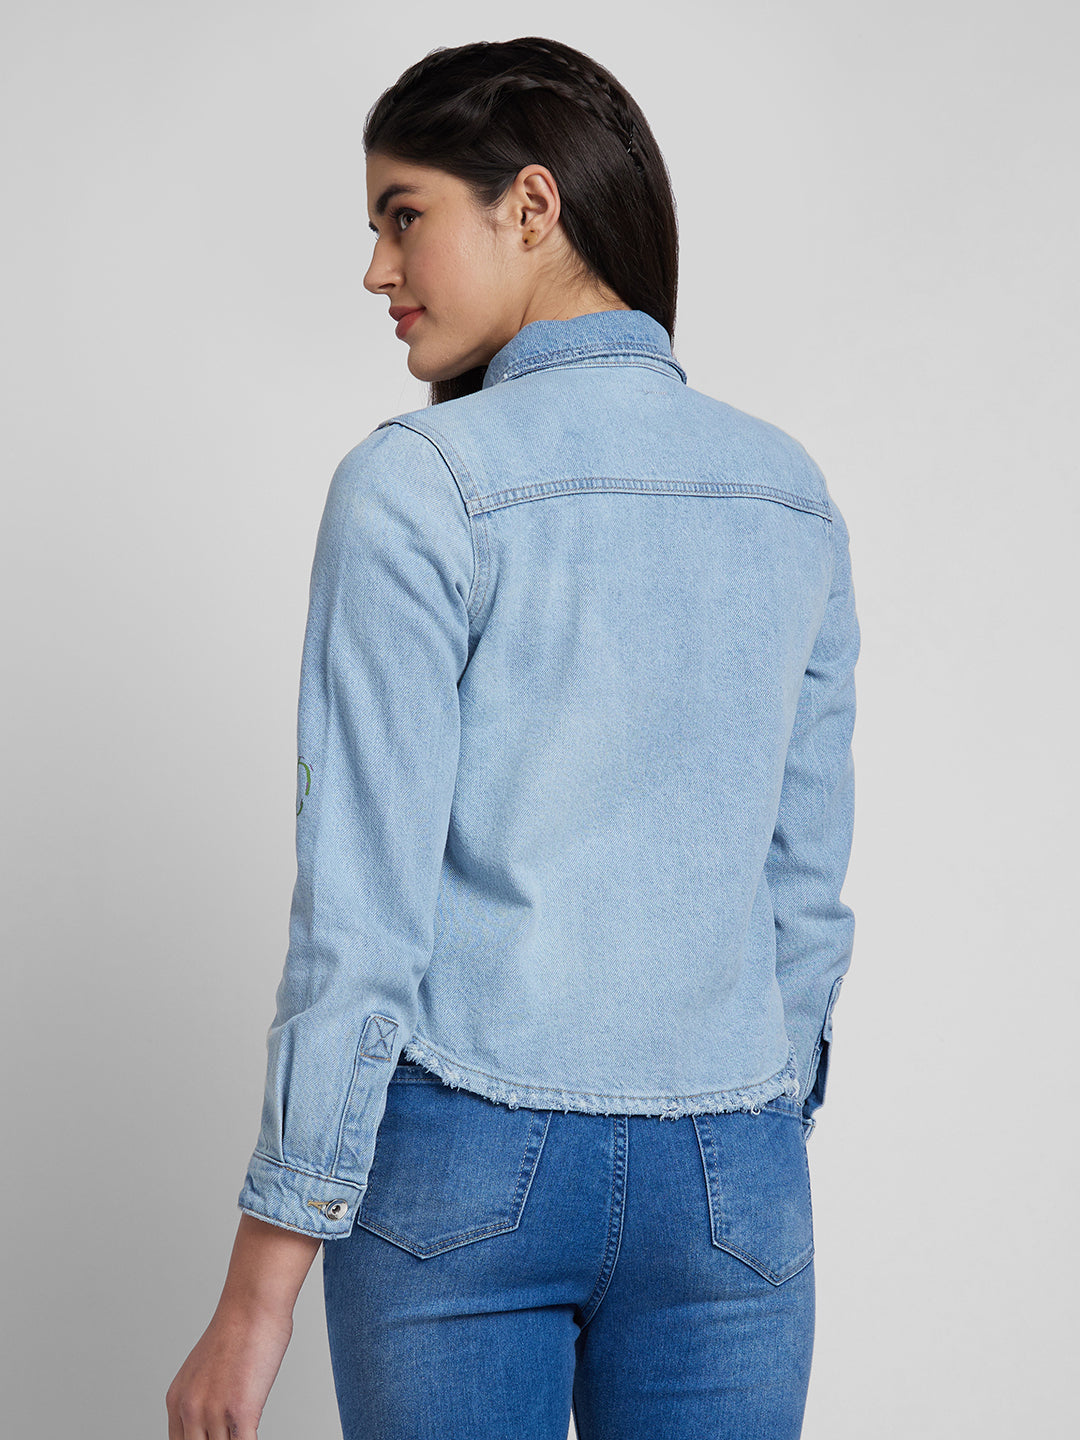 Denim Jacket Denim Light Blue Jacket For Women with Rose Patch at Rs  250/piece in New Delhi